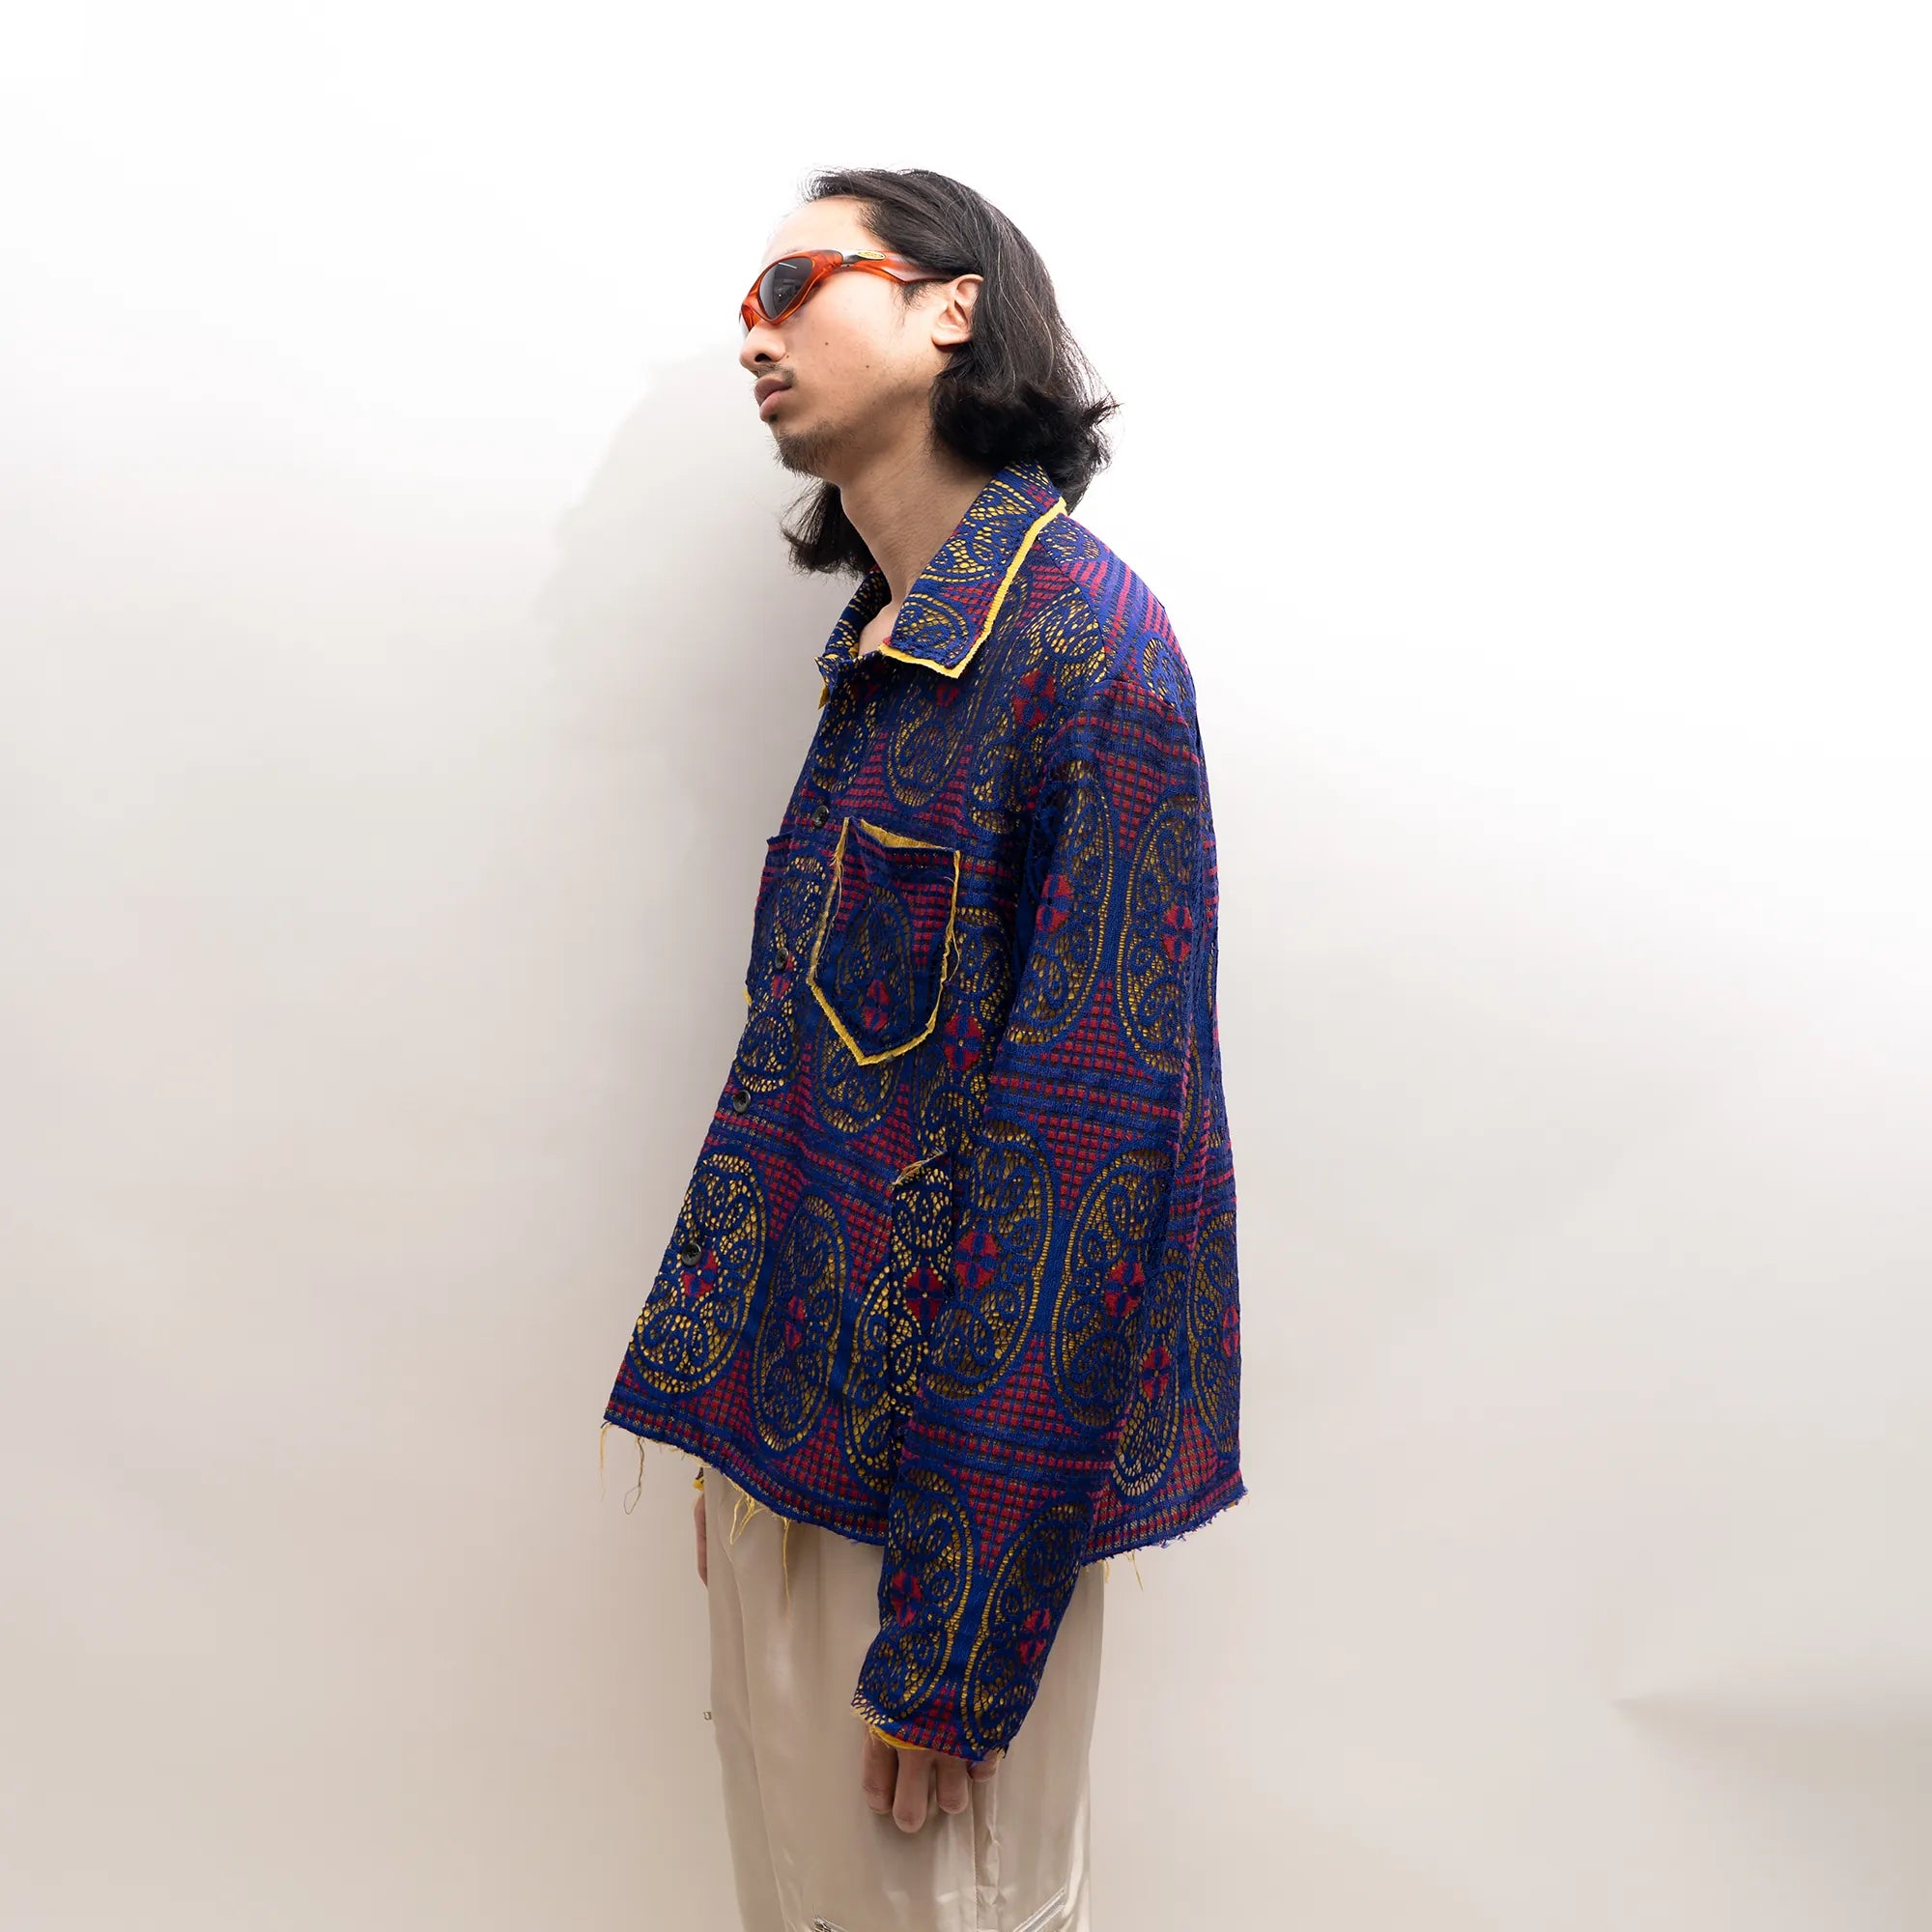 No:ps23t07 | Name:Inside Out L/S Lace Shirt | Color:Navy-Red-Yellow【PLATEAU STUDIO_プラトー スタジオ】